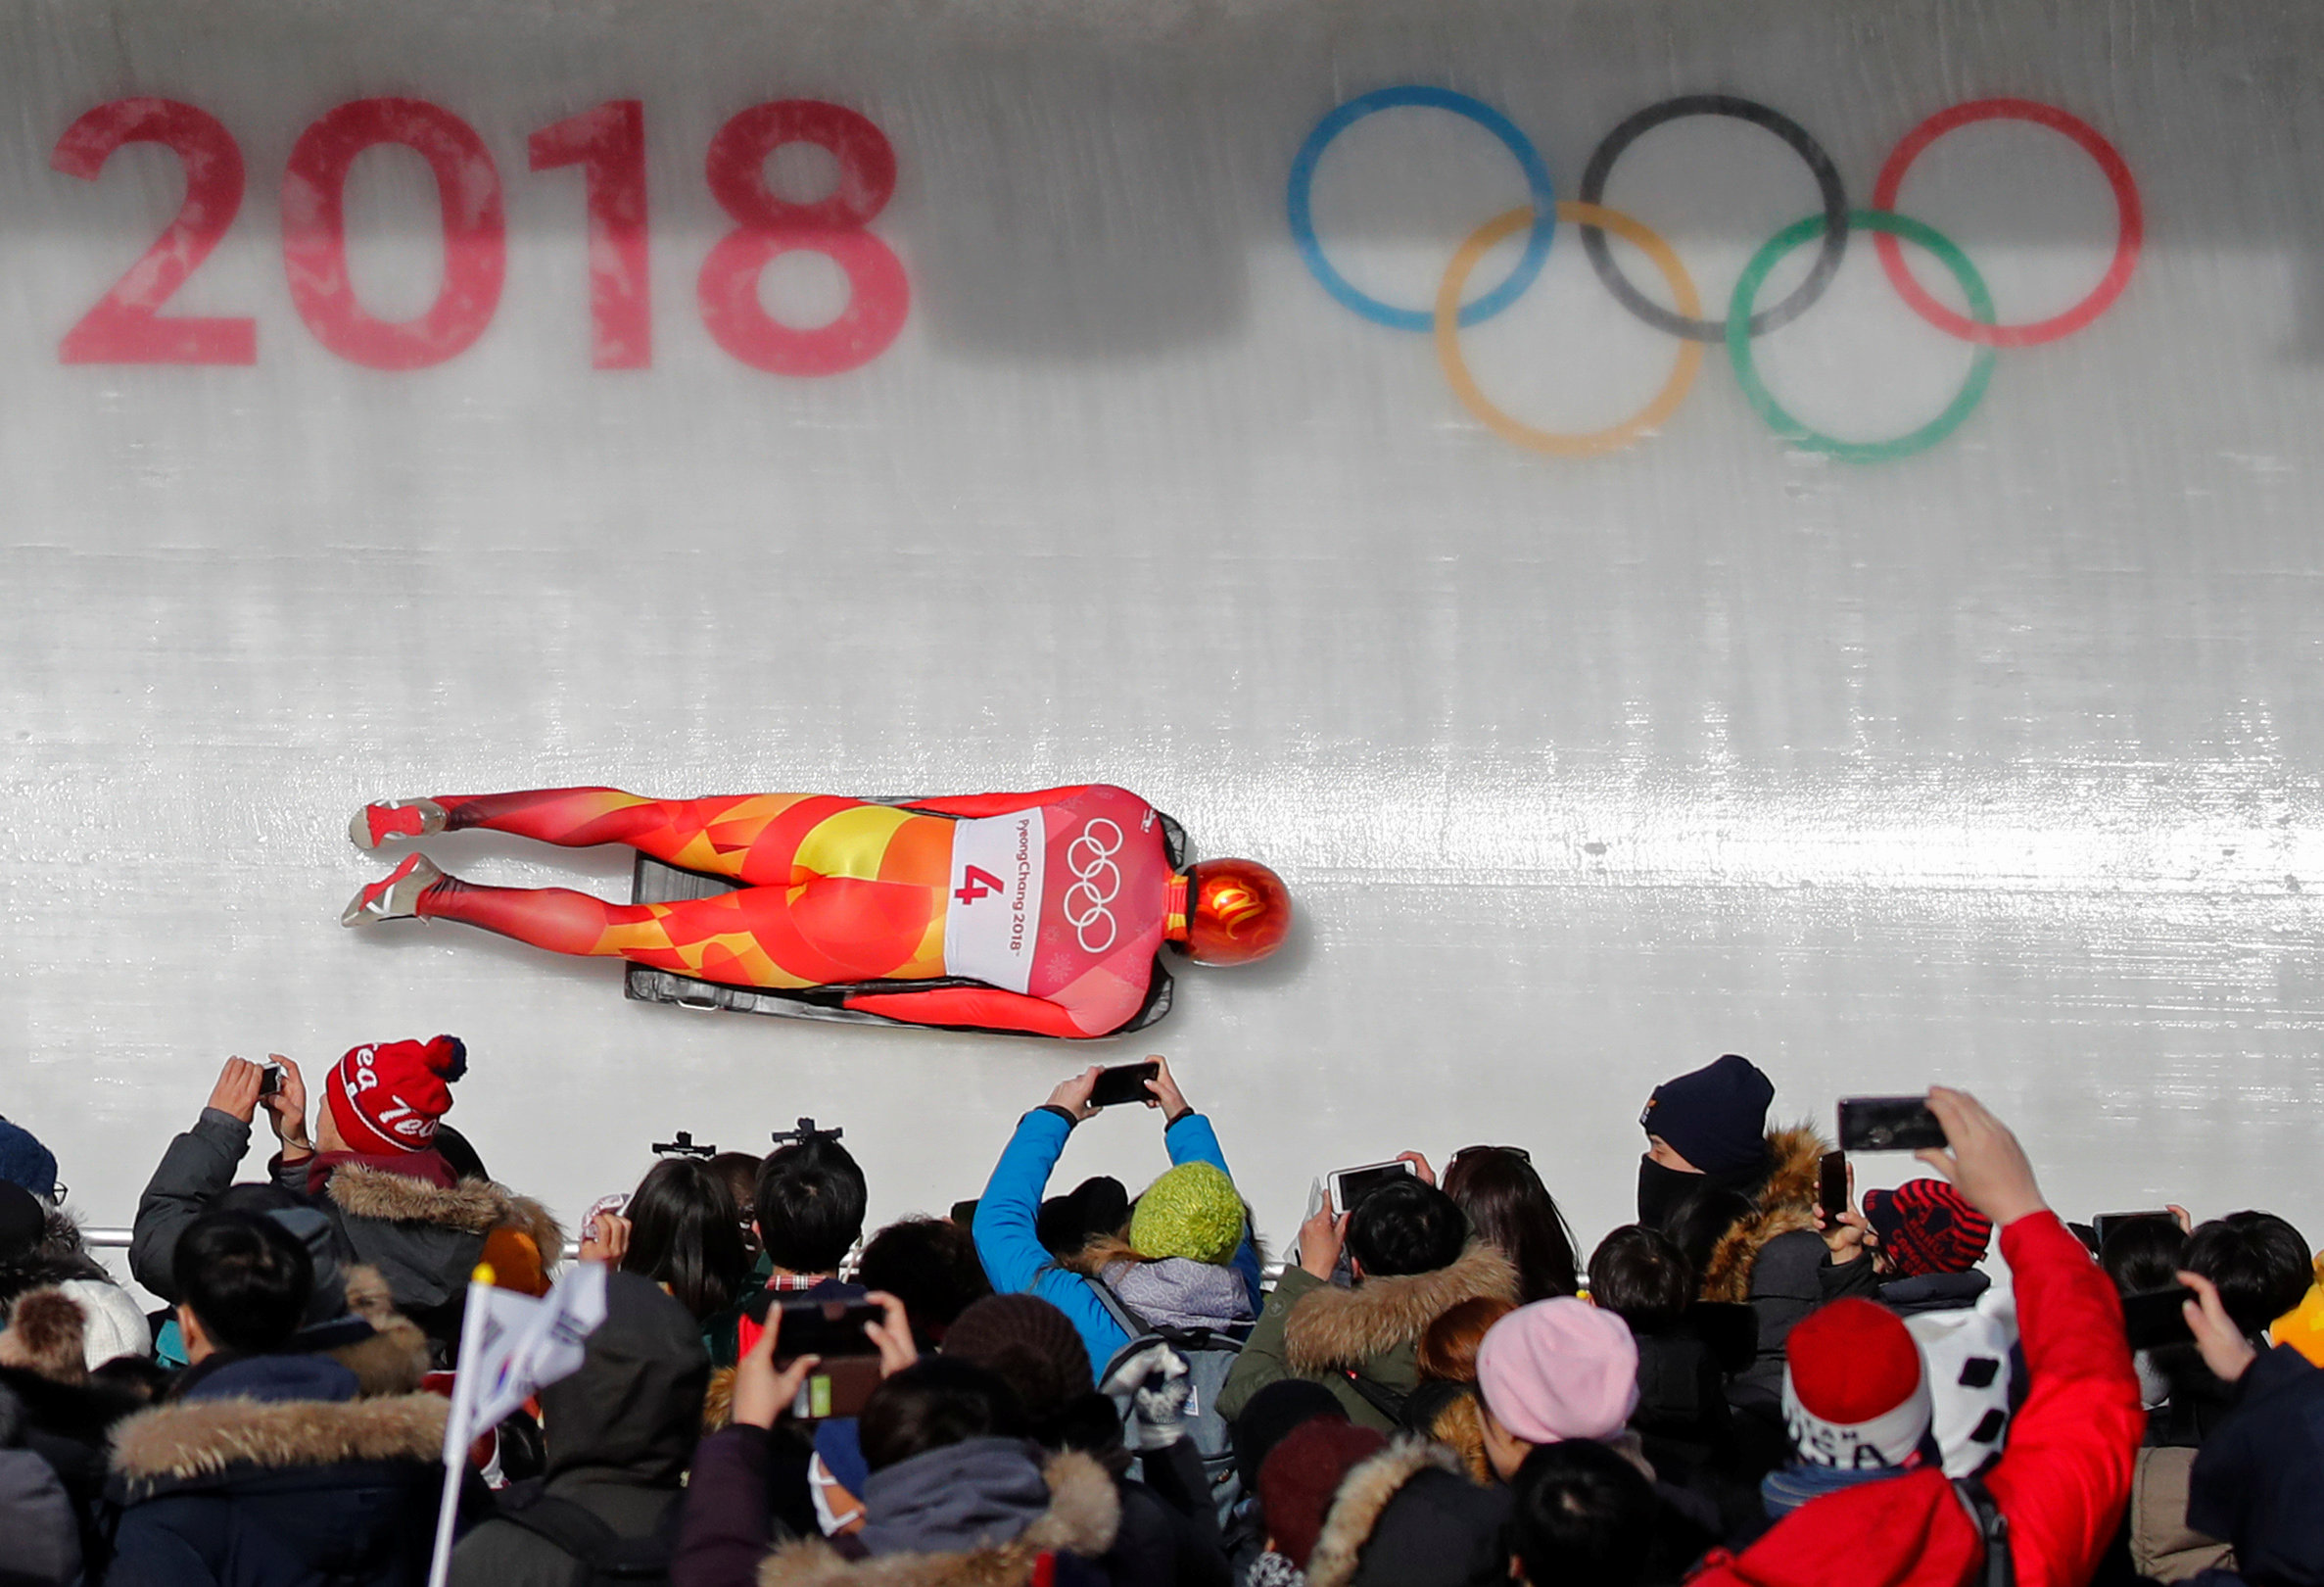 Skeleton racer Ander Mirambell competes in the 2018 Winter Olympics (by ACN)